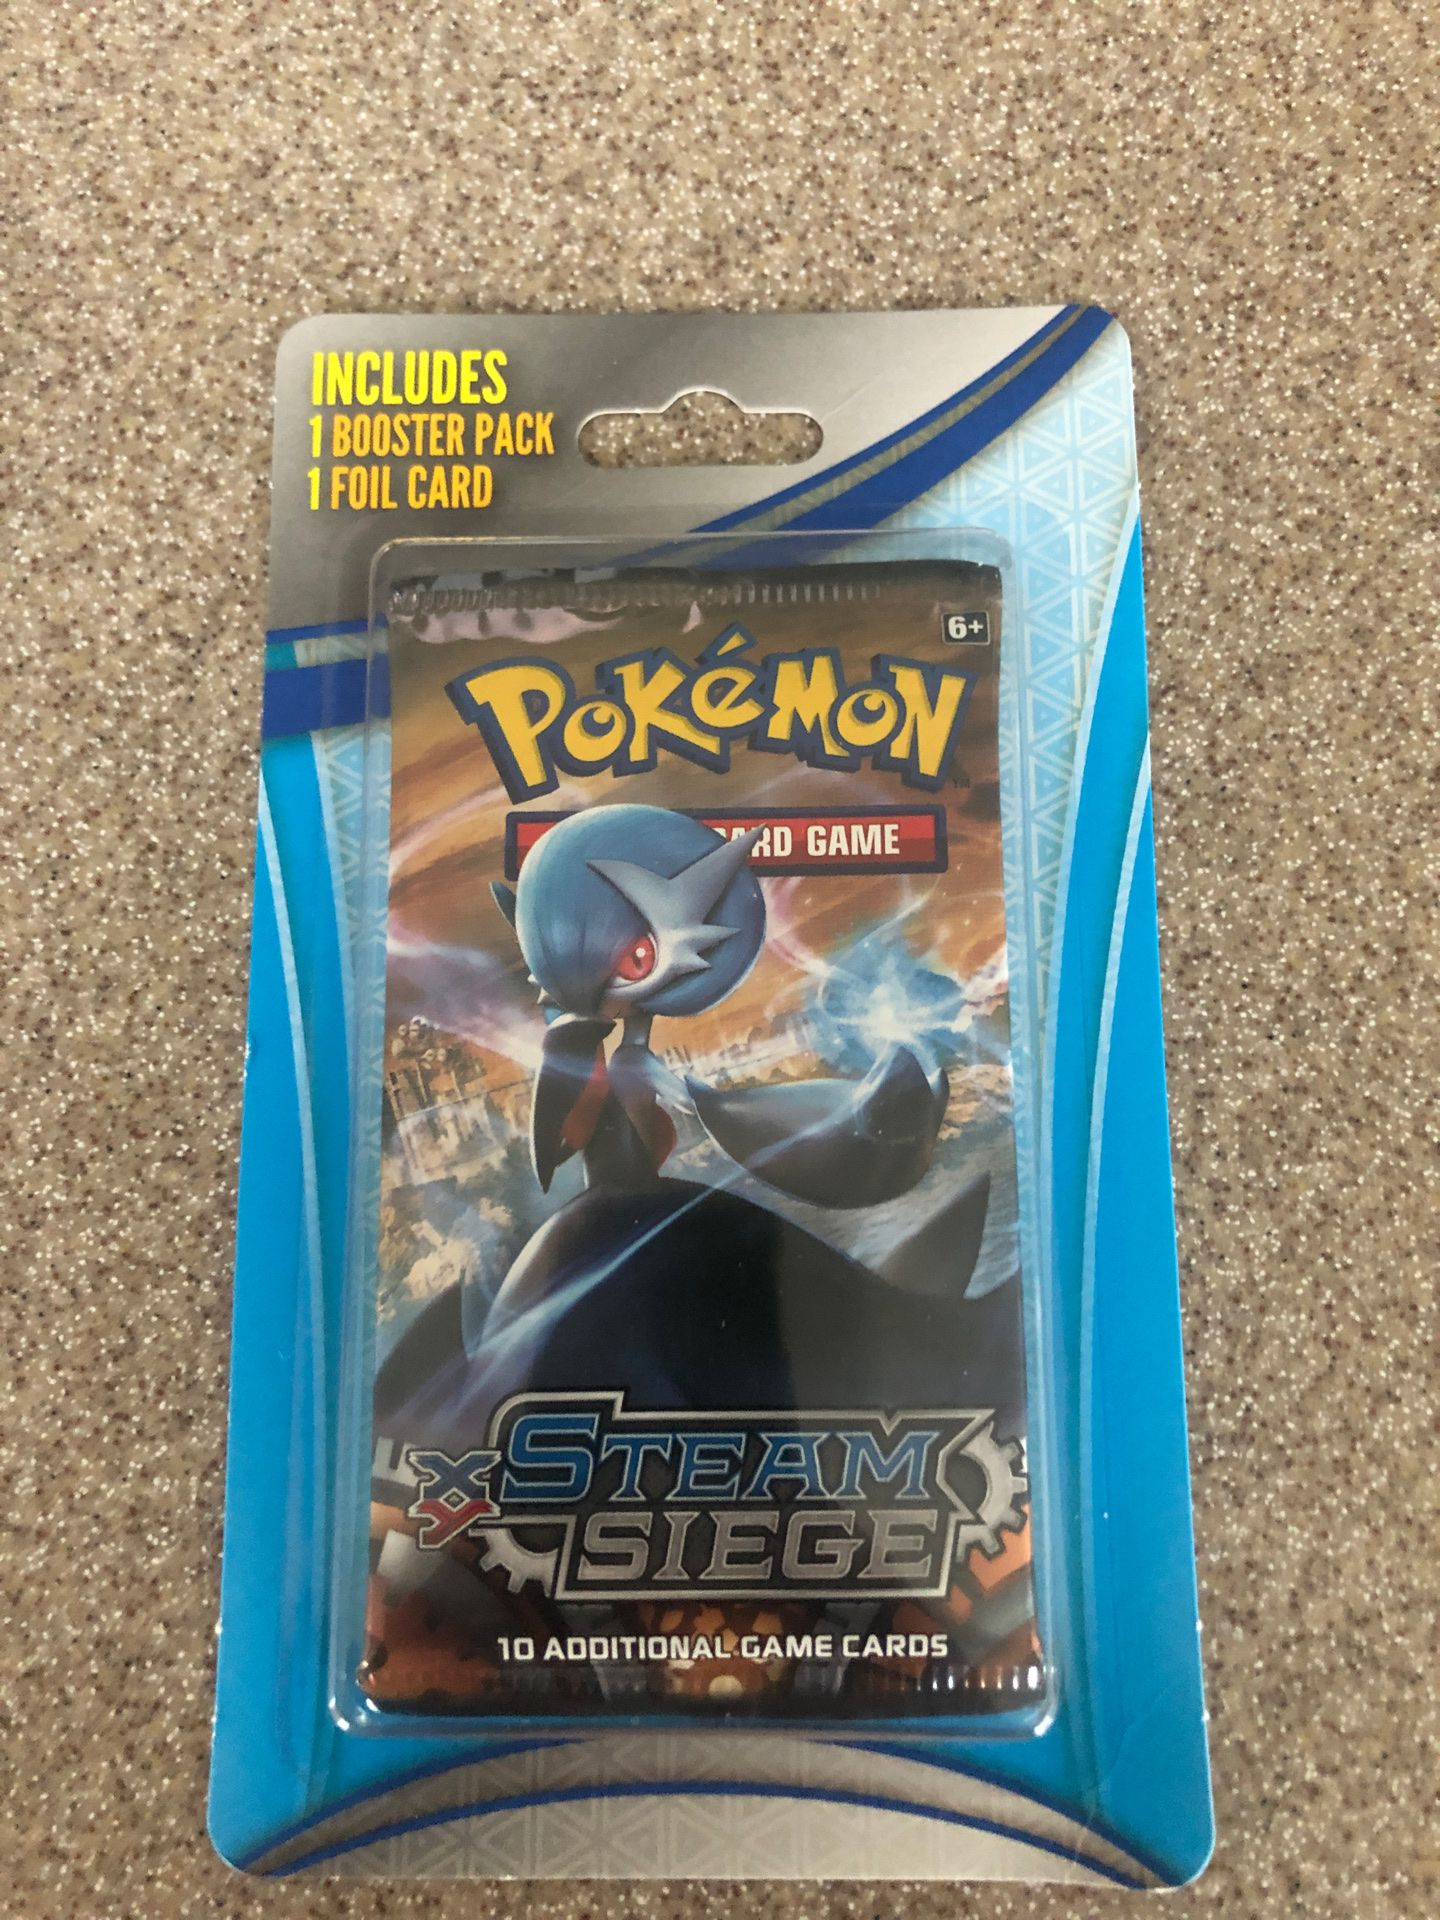 Pokémon XY STEAM SIEGE 1 BOOSTER PACK AND 1 FOIL CARD - New 🔥 WALGREENS 